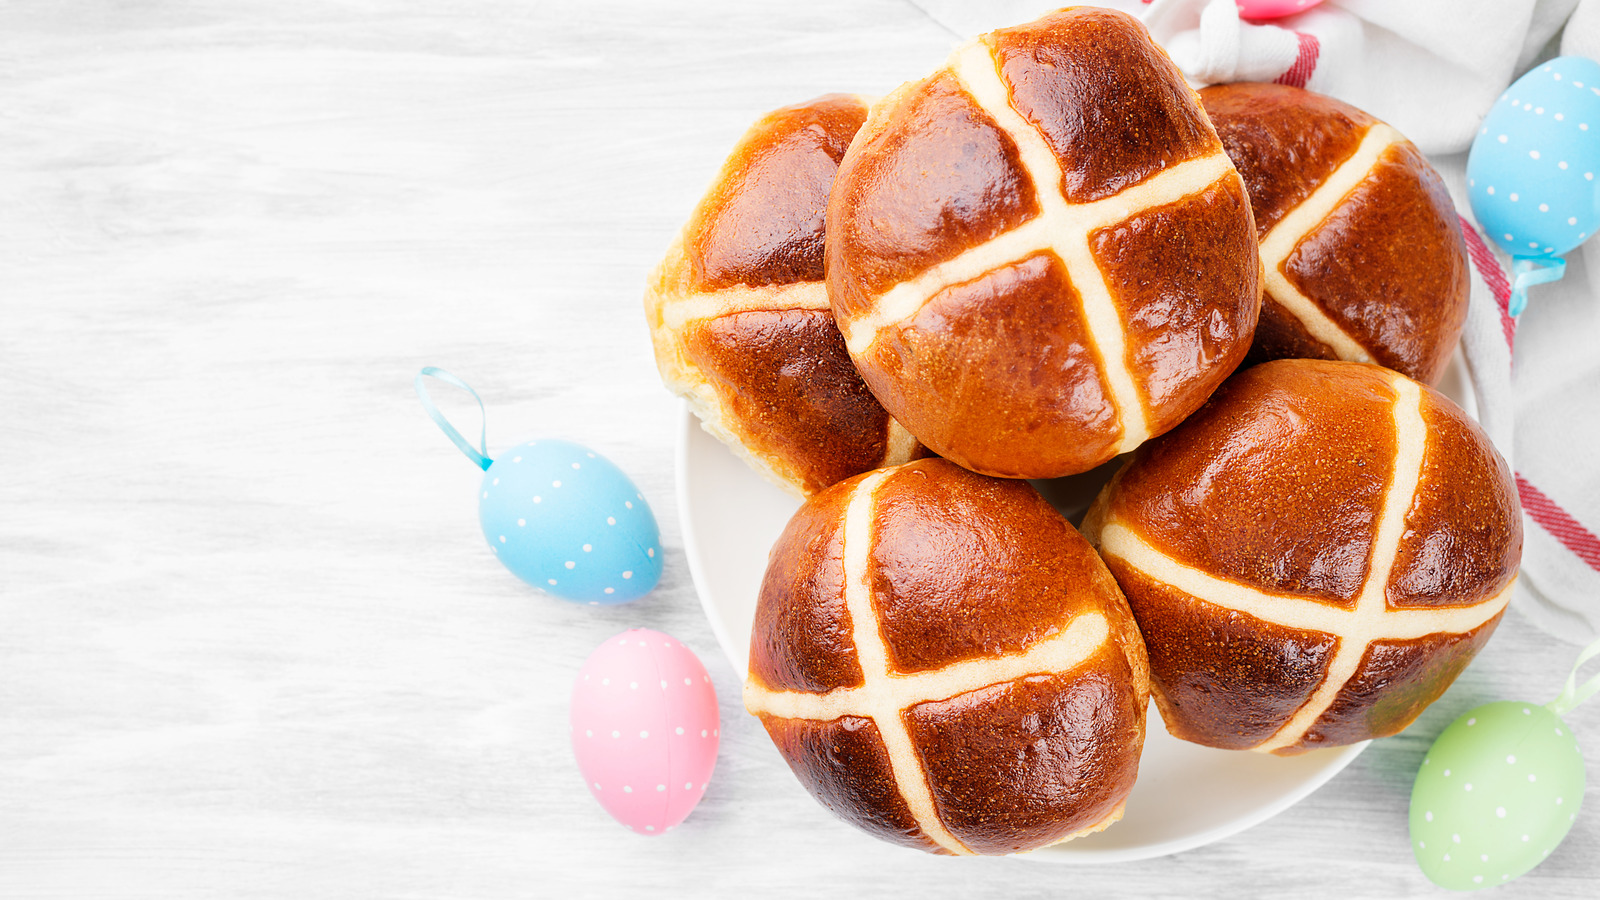 Why Hot Cross Buns Are Eaten On Easter